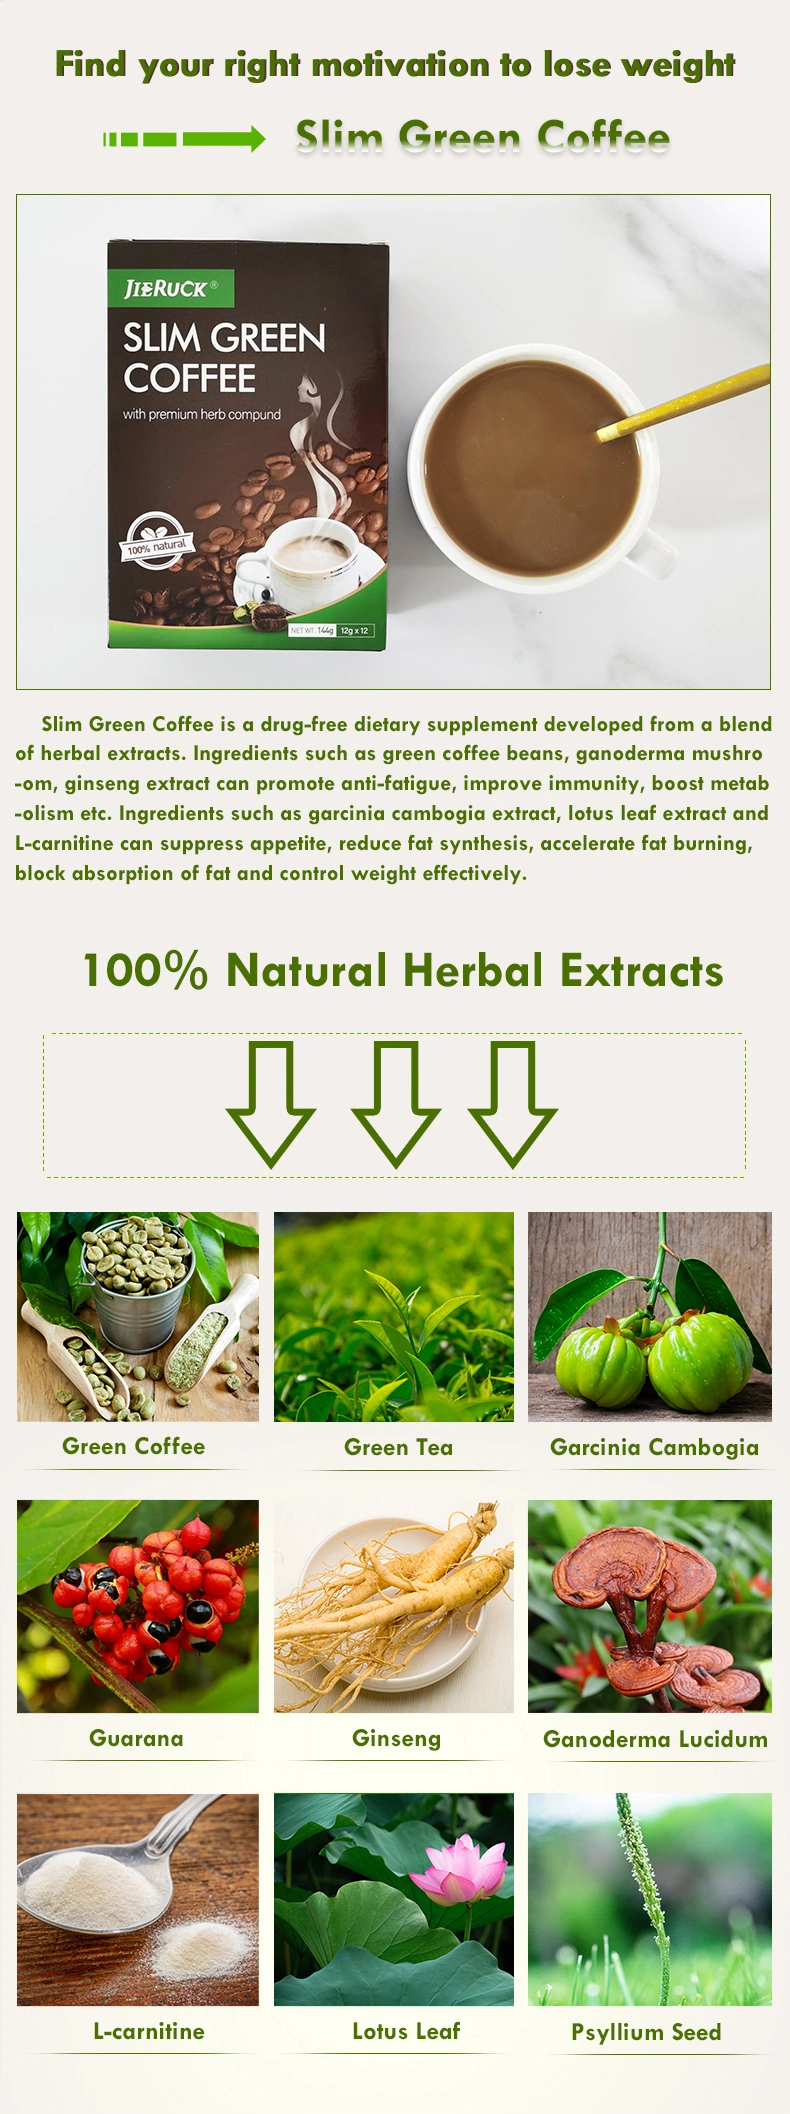 Chinese Herbs Strong Effect Garcinia Cambogia Plant Extracts Weight Loss Diet Green Coffee Slimming Products